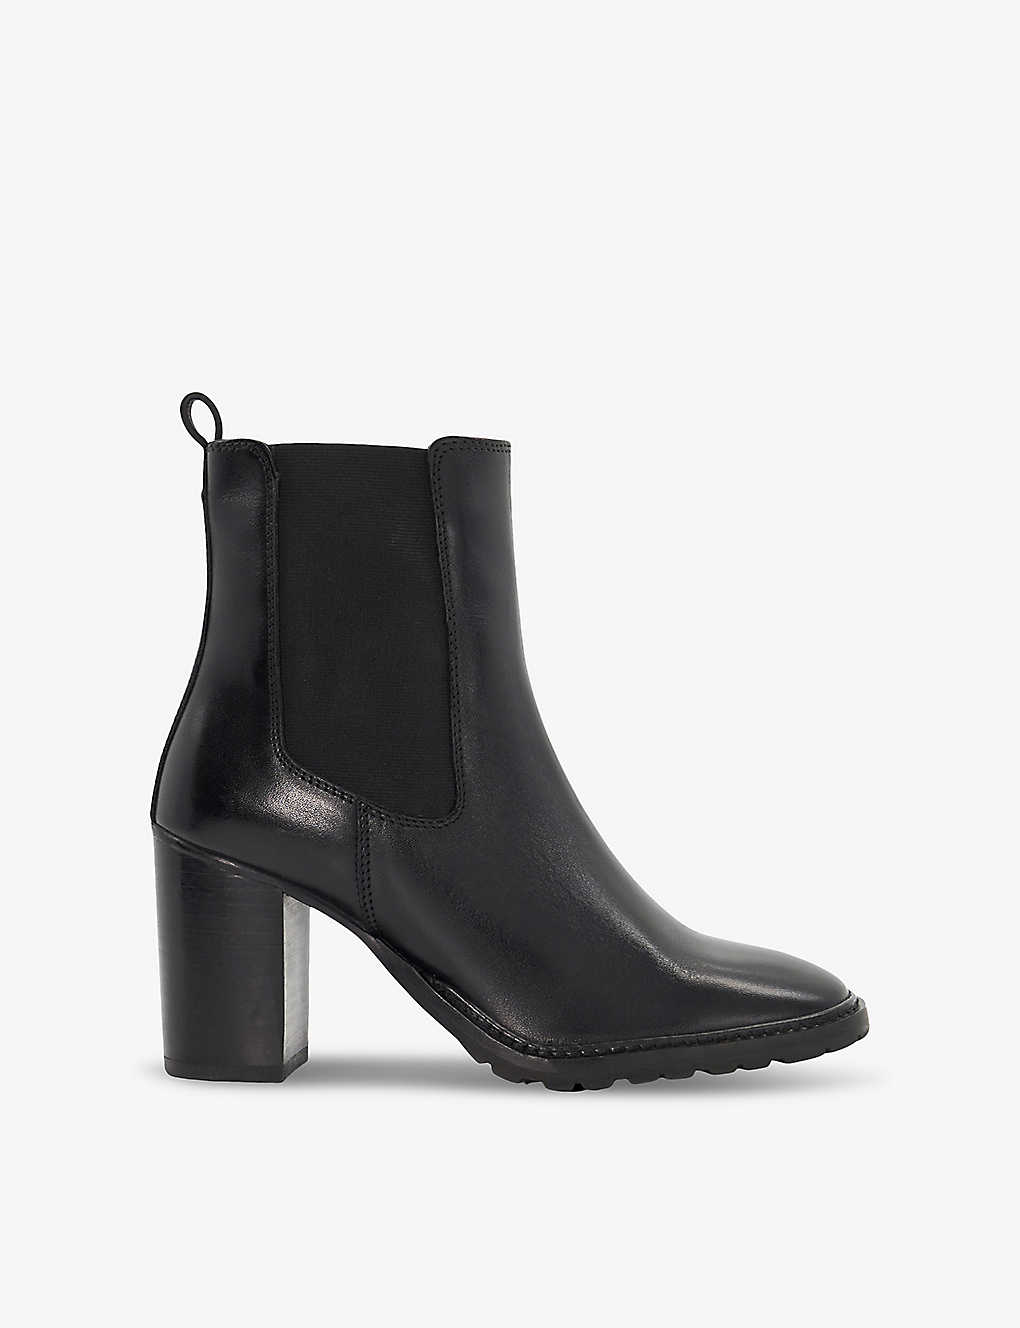 Dune Womens Black-leather Petition Square-toe Heeled Leather Ankle Boots